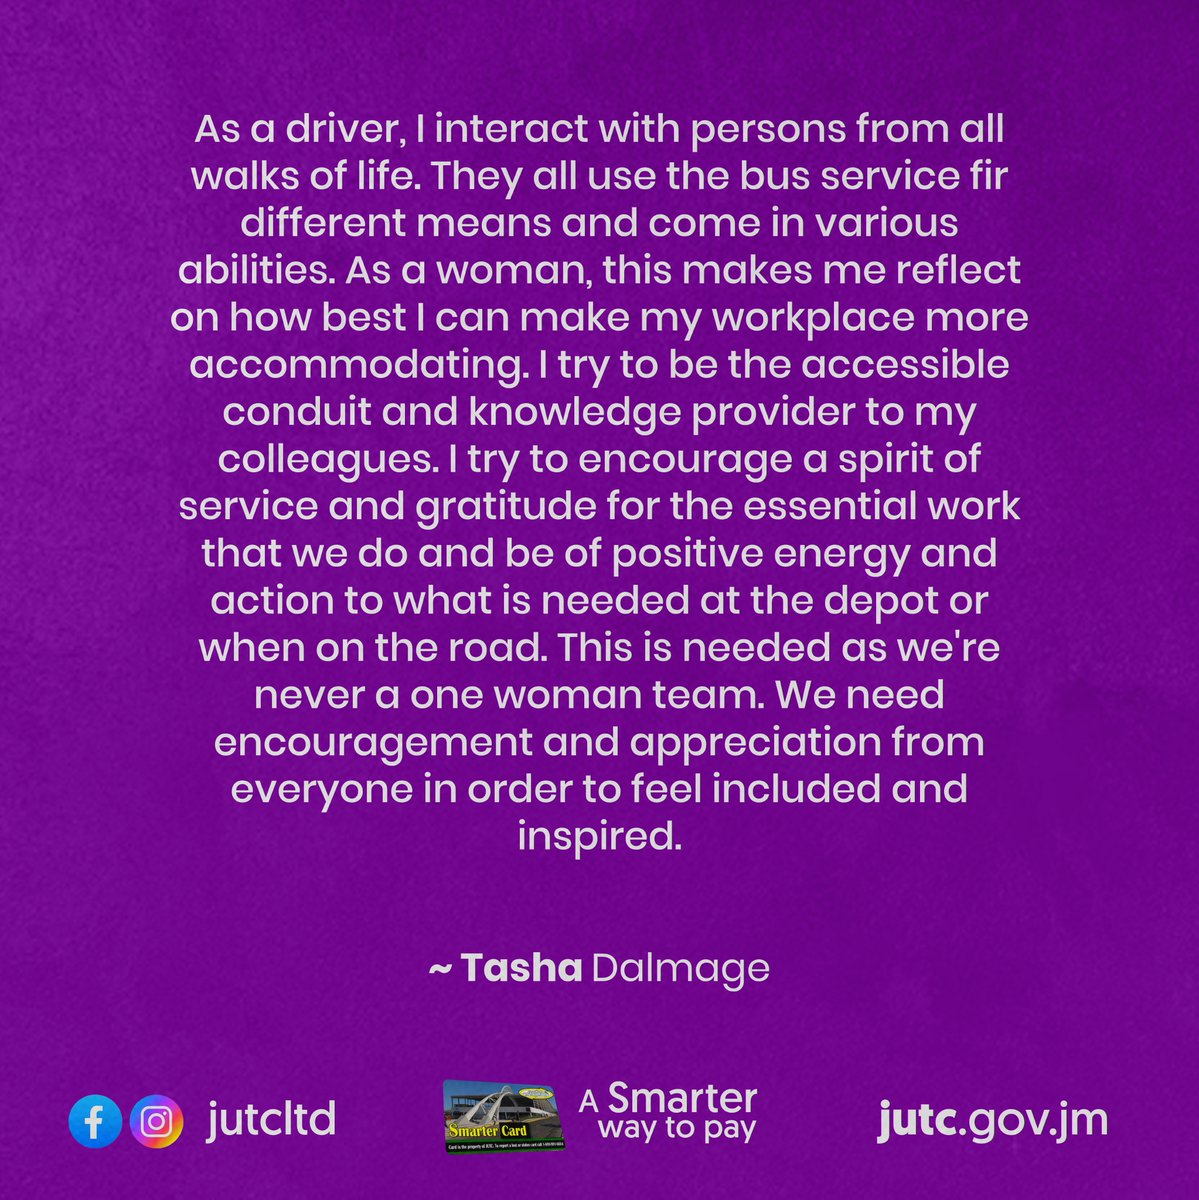 Today, our woman in the spotlight is Ms. Tasha Dalmage, one of our exceptional drivers! 🚌 Let's celebrate these remarkable women who ensure bus rides are safe in the city! #WomenInTransport #JUTC #PublicTransportHeroes